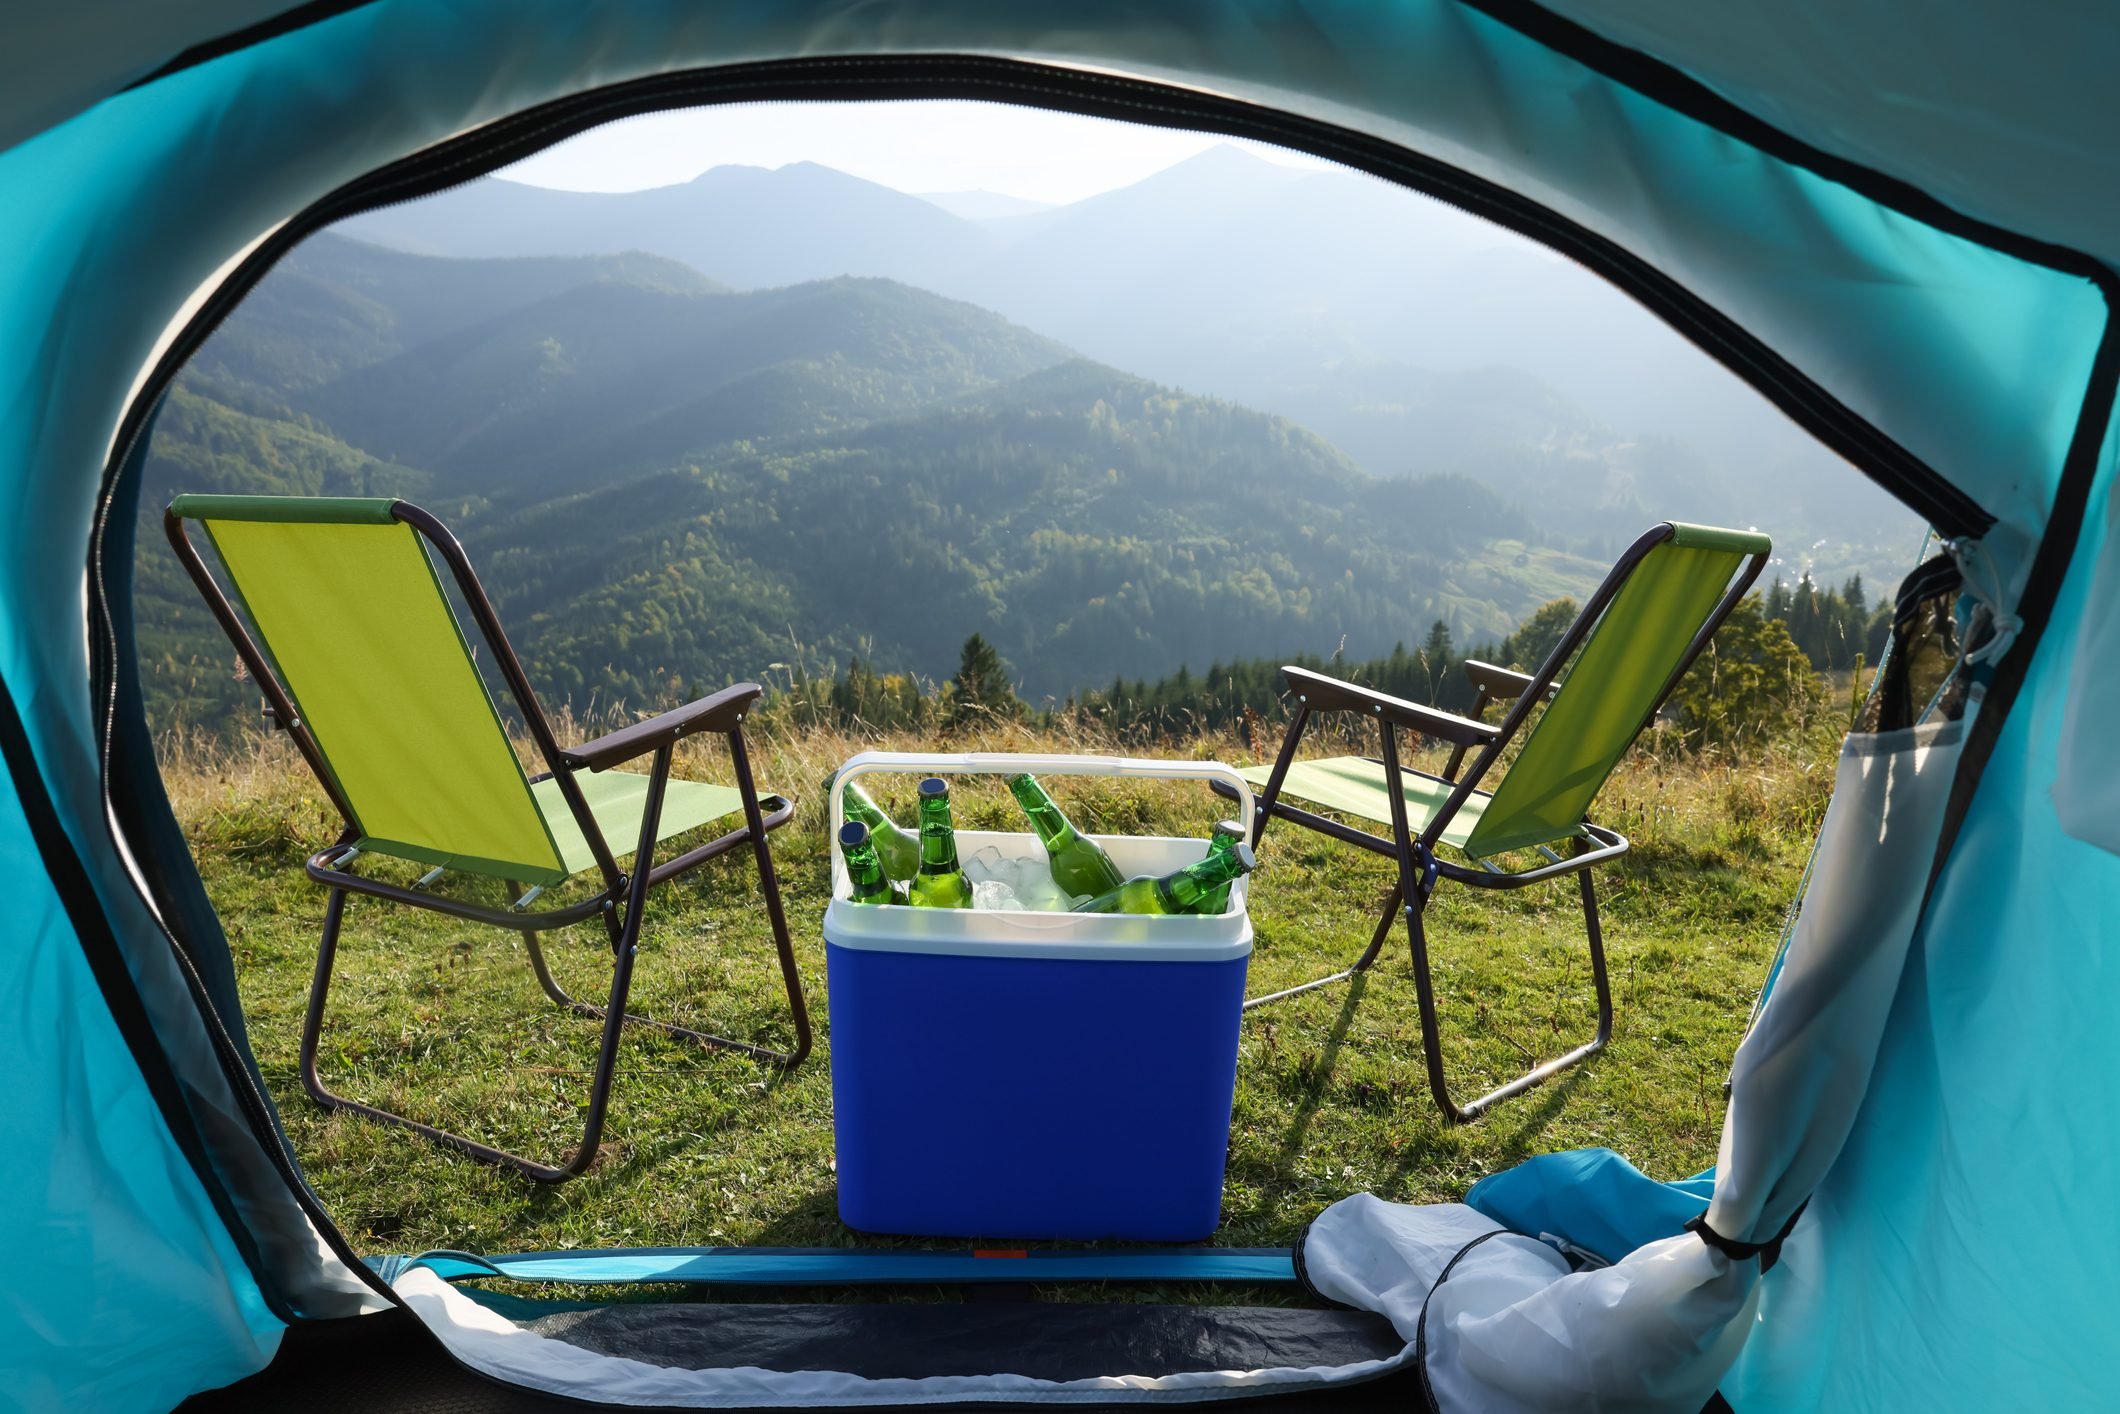 Camping Portable Coolers, Portable Coolers Beers